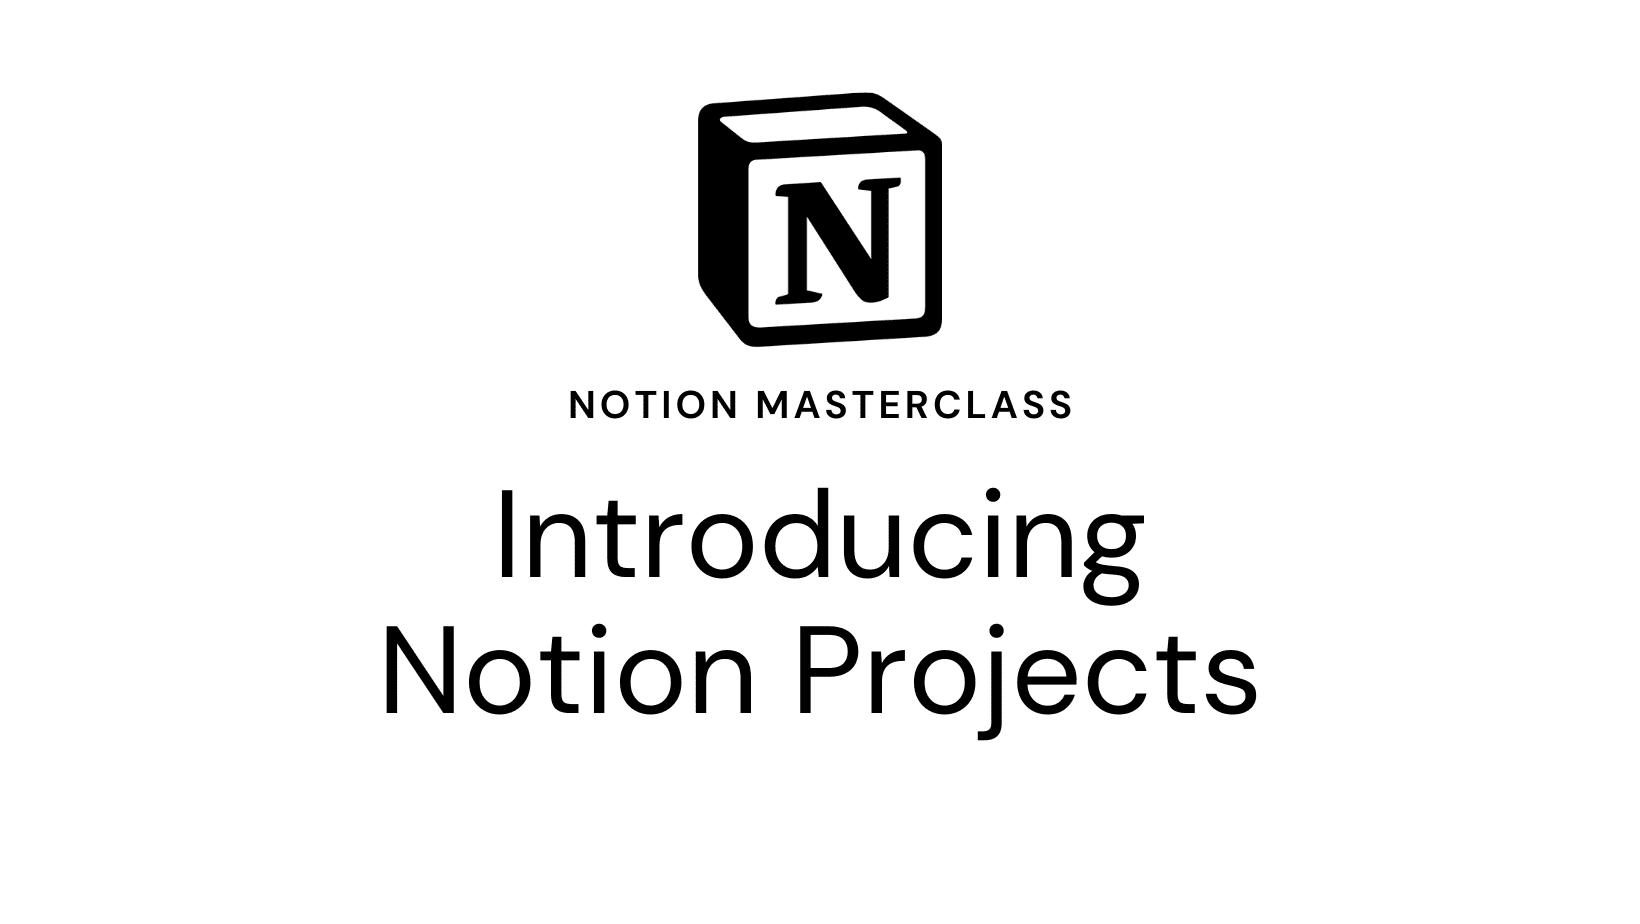 Supercharge Your Online Business: Introducing Notion Projects